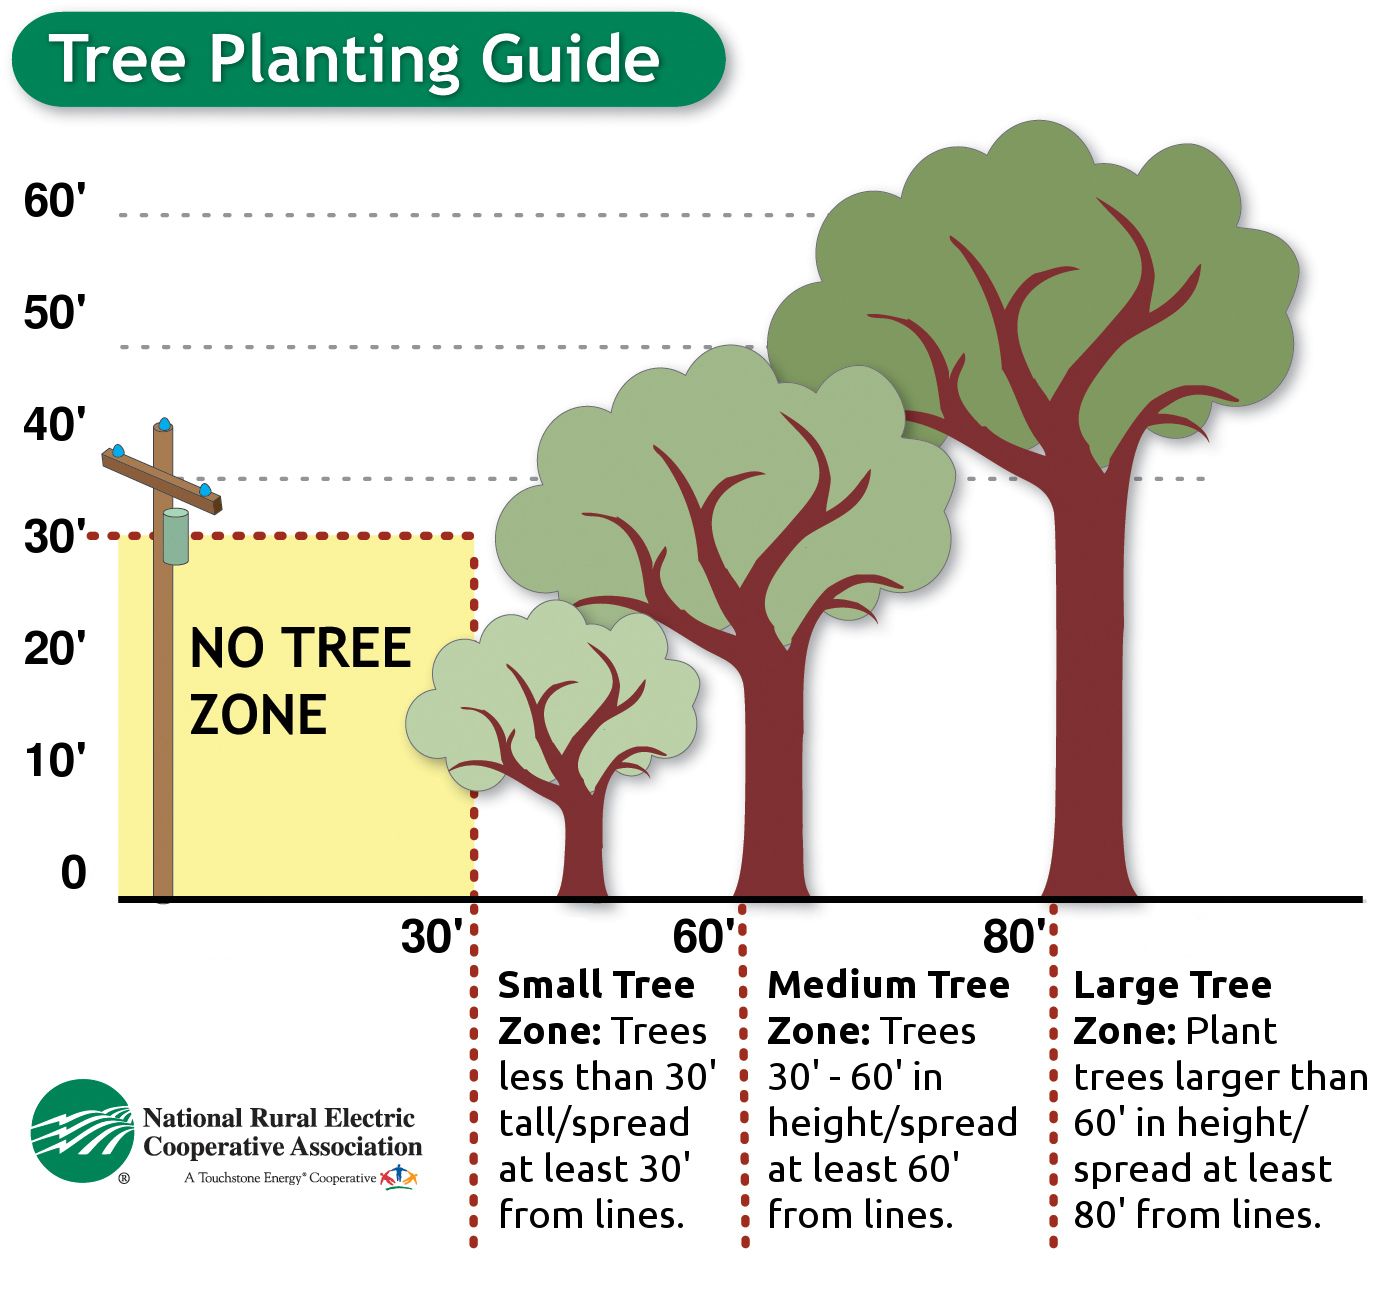 Tree Planting Guide